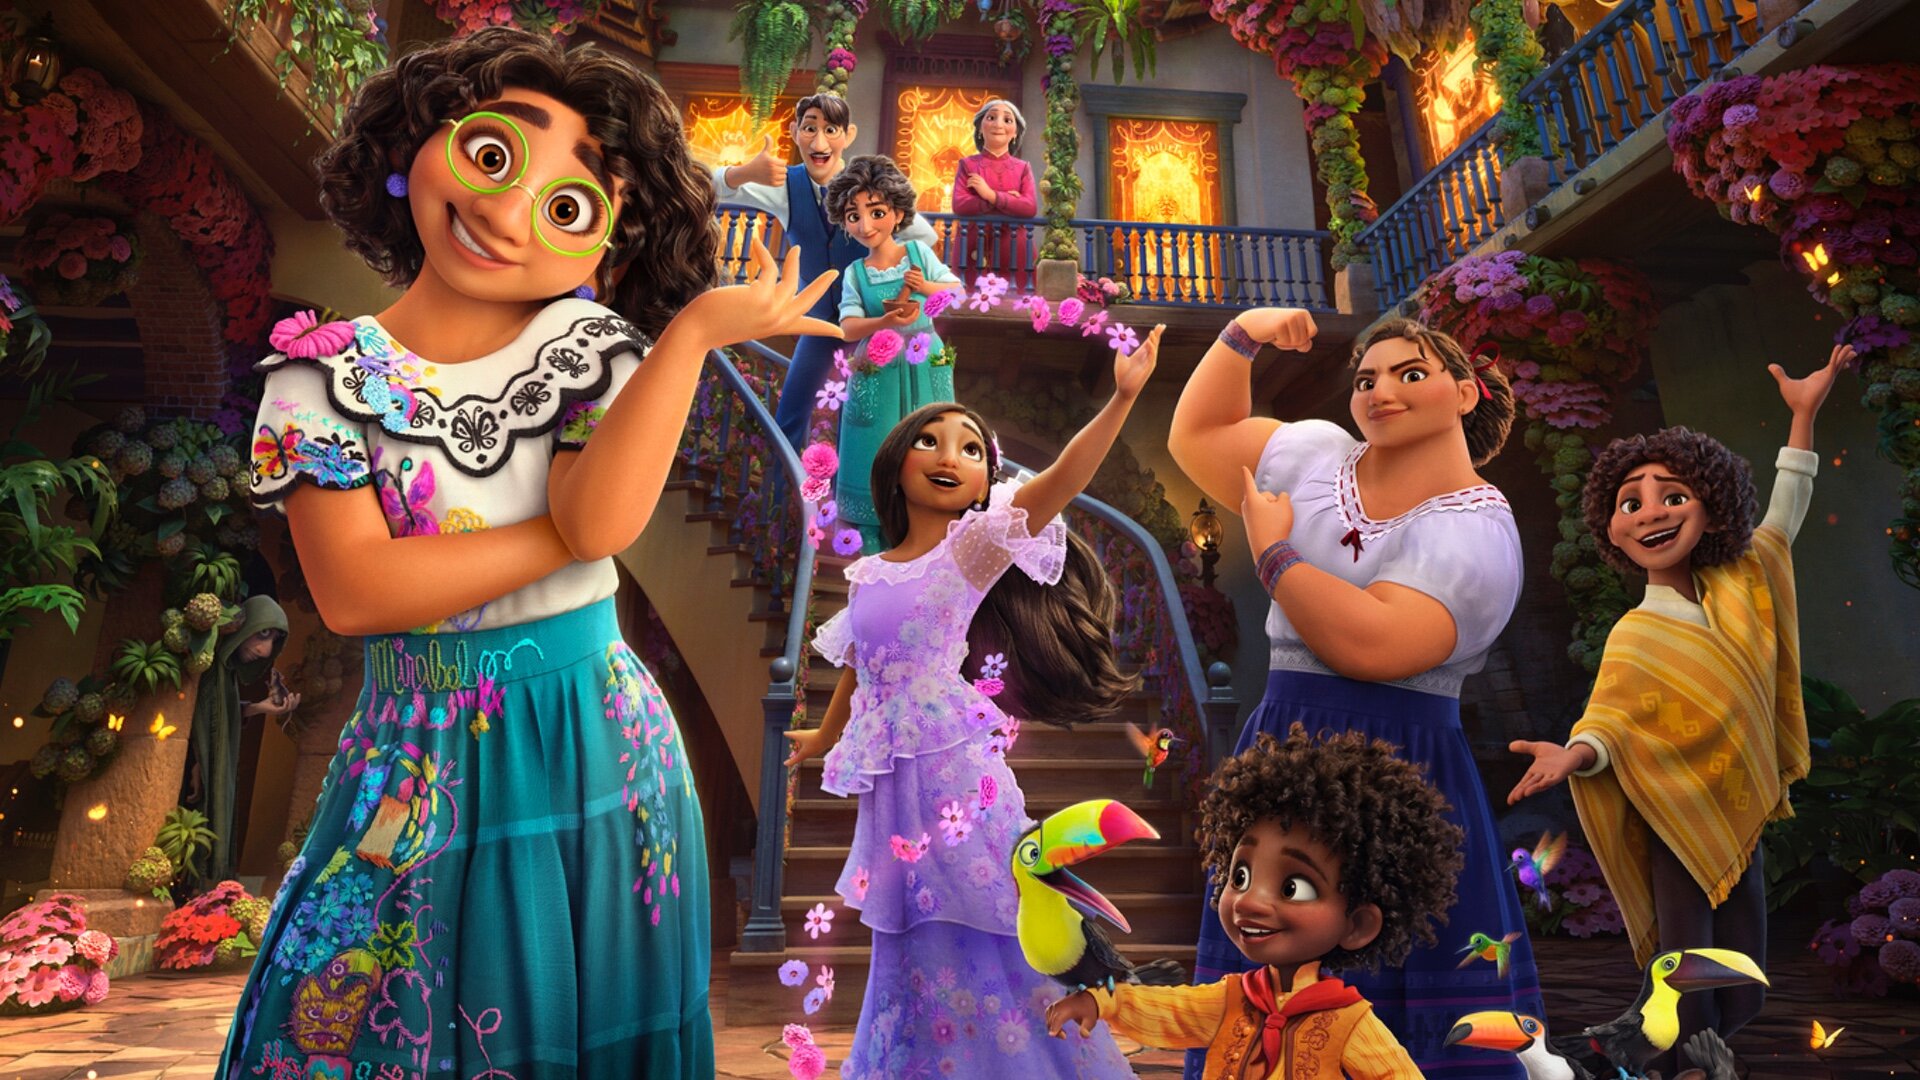 There Is Magic In The Air In New Trailer For The Upcoming Disney Film ENCANTO